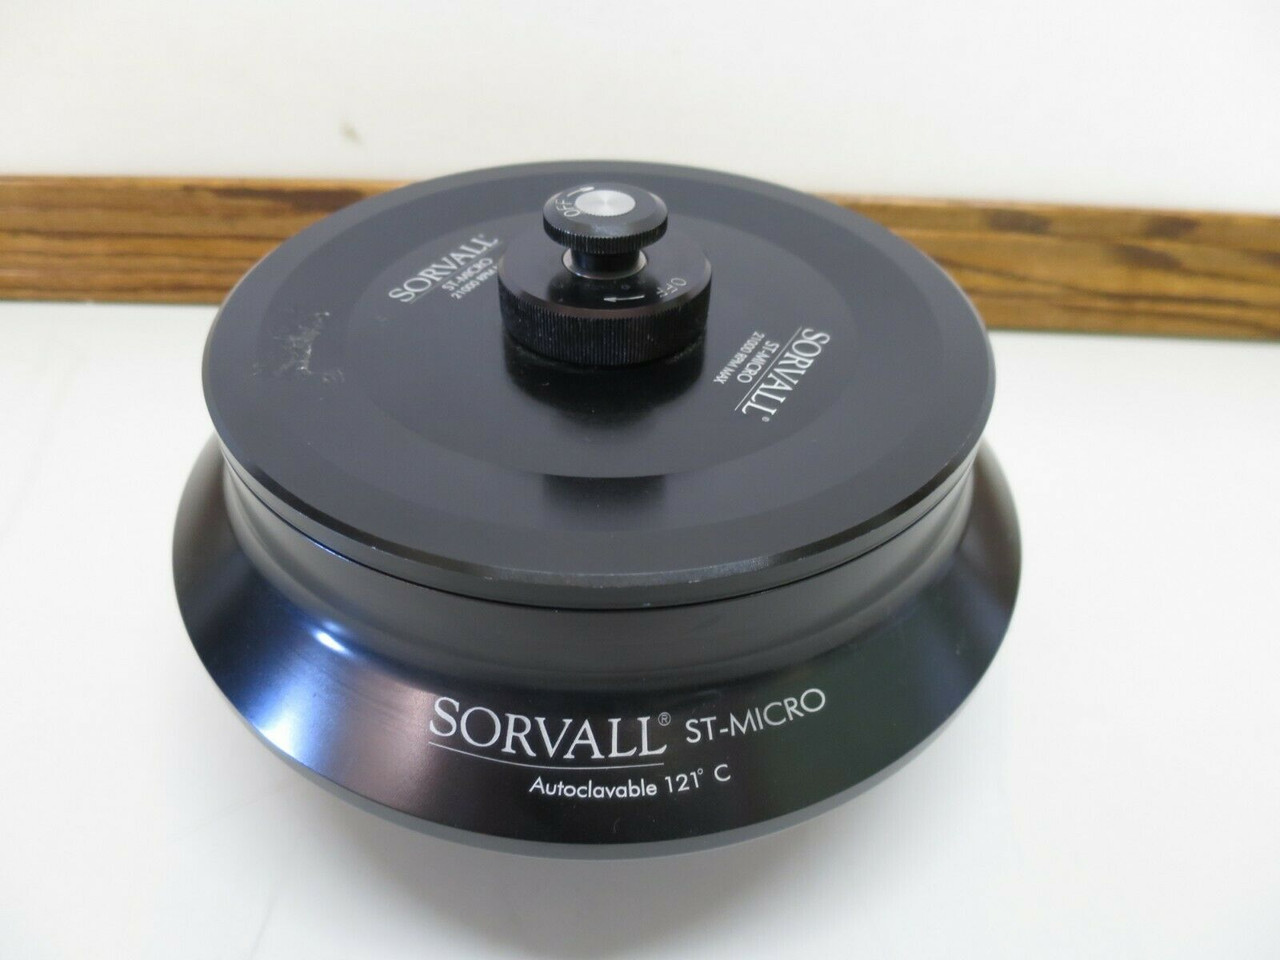 Thermo Sorvall ST-MICRO Autoclavable Centrifuge Rotor